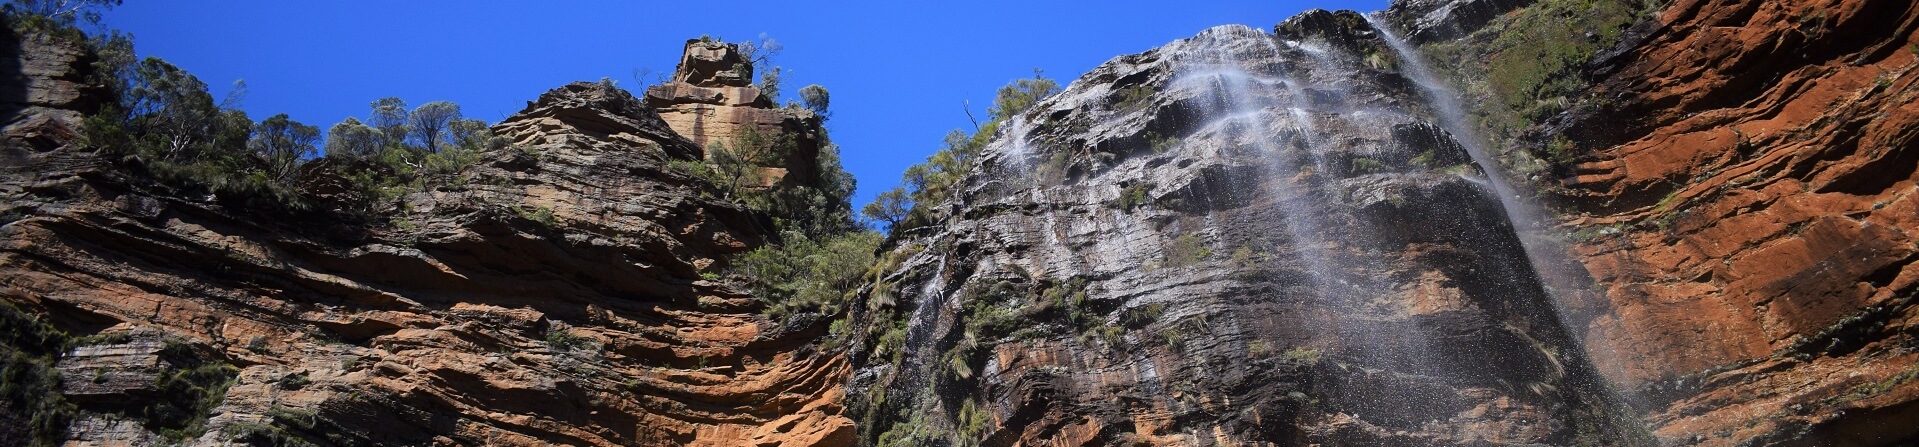 How long is the walk down to Wentworth Falls?